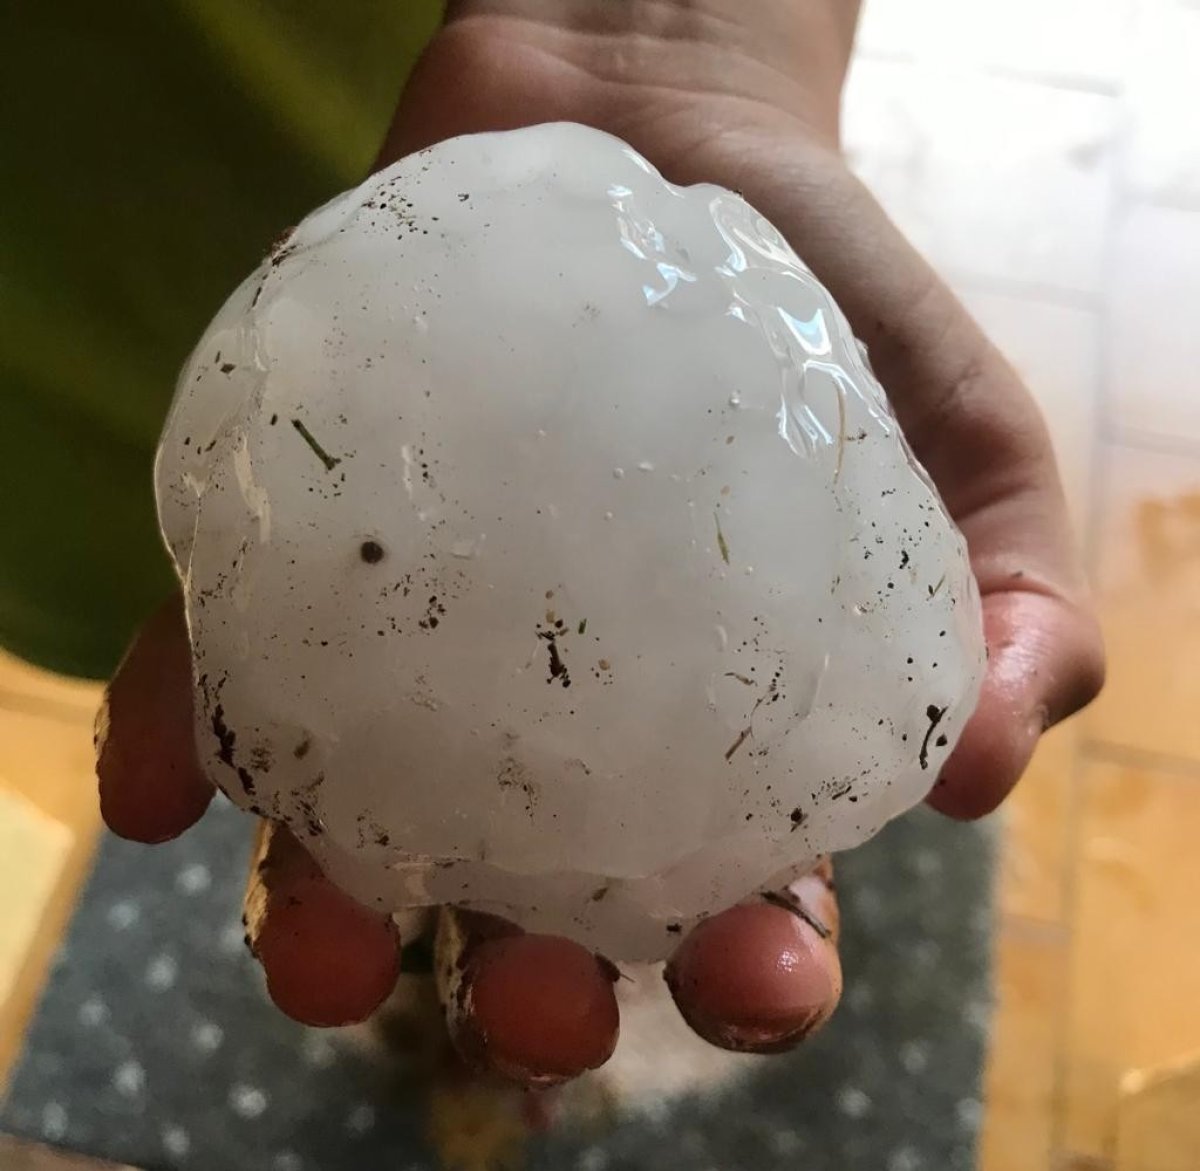 In Spain, hail the size of a tennis ball #4